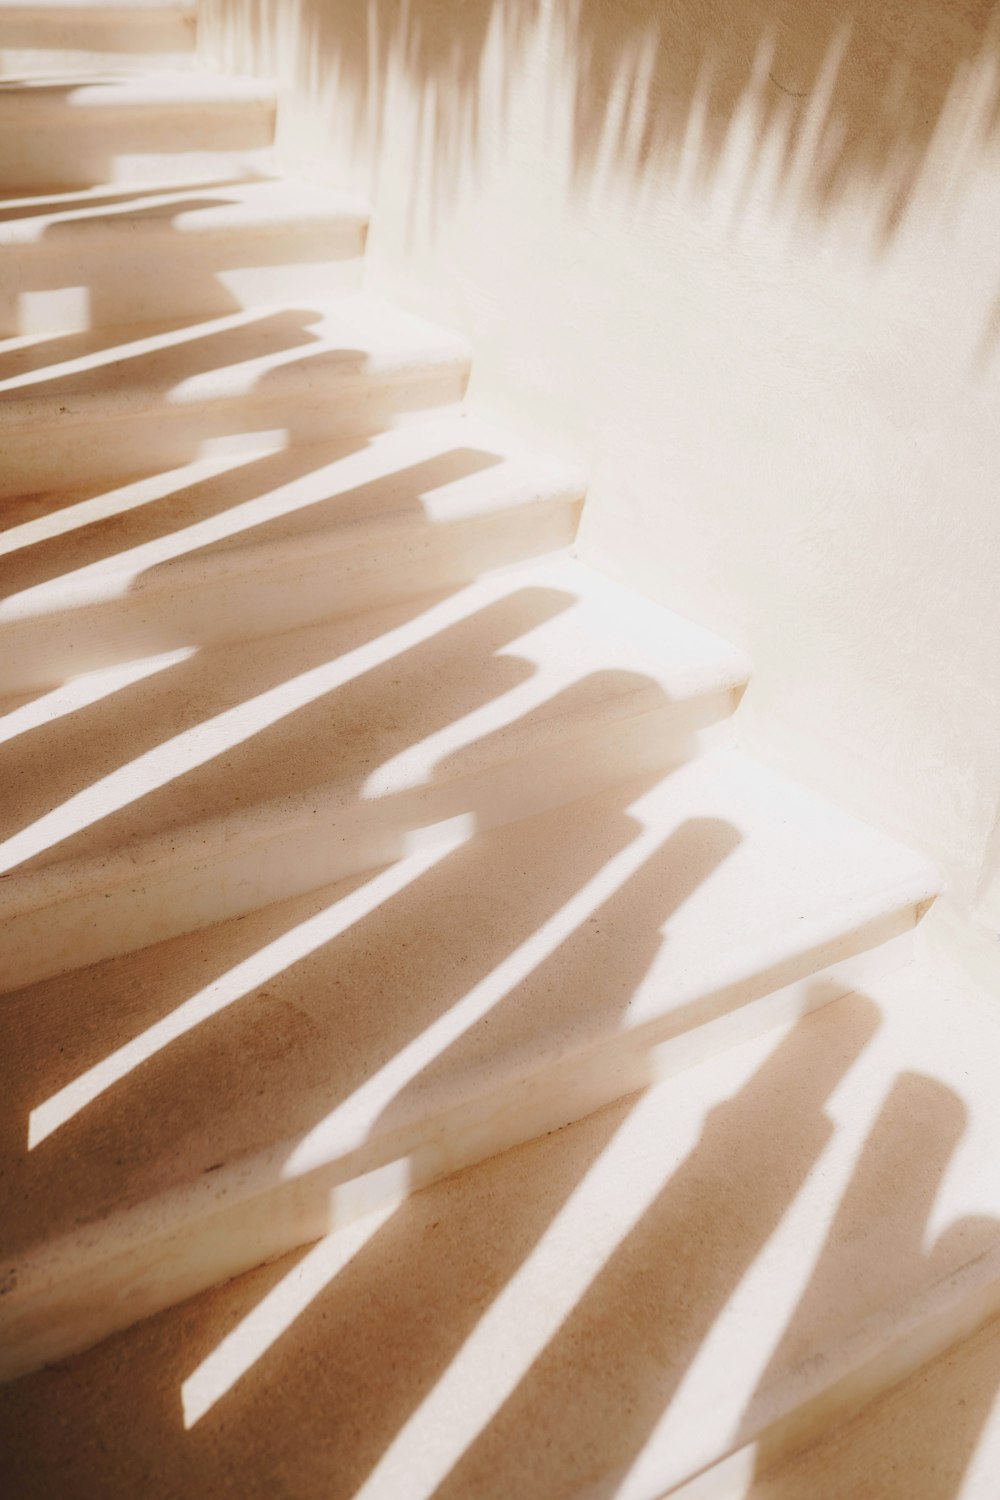 a set of stairs casting long shadows on the wall